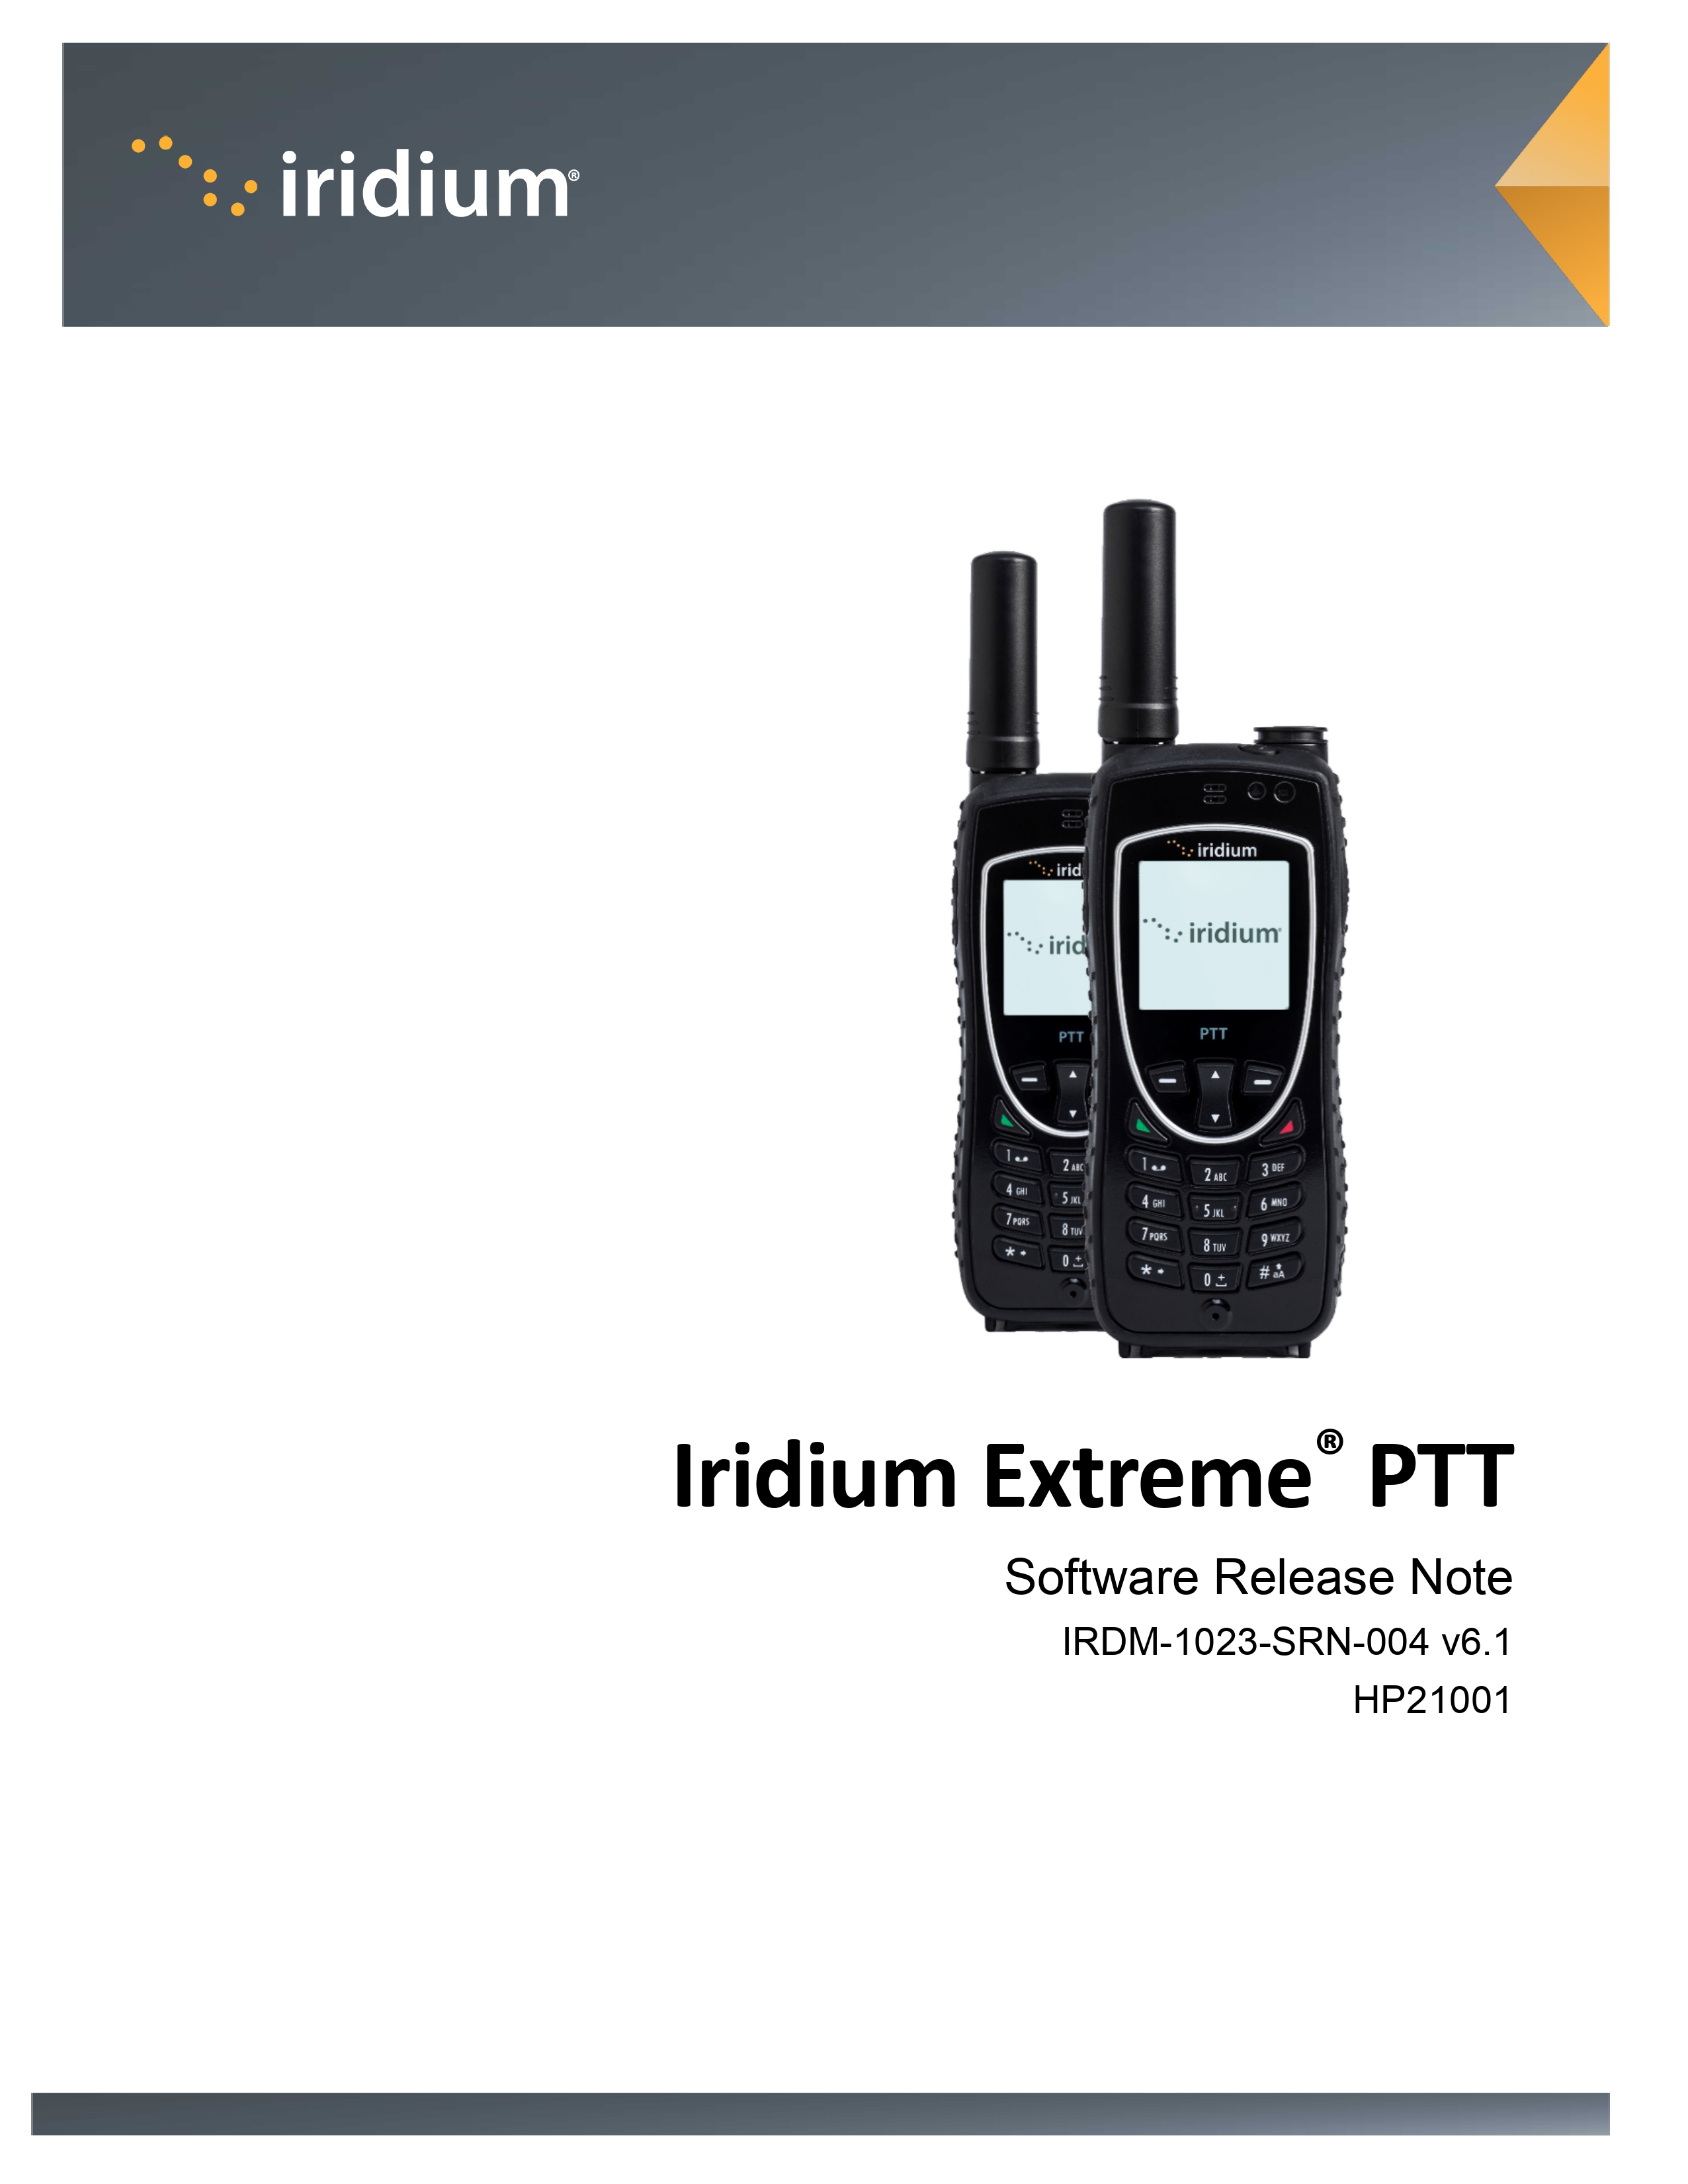 Iridium_Extreme_PTT_Software_Release_Note_-_HP21001_page-0001.jpg